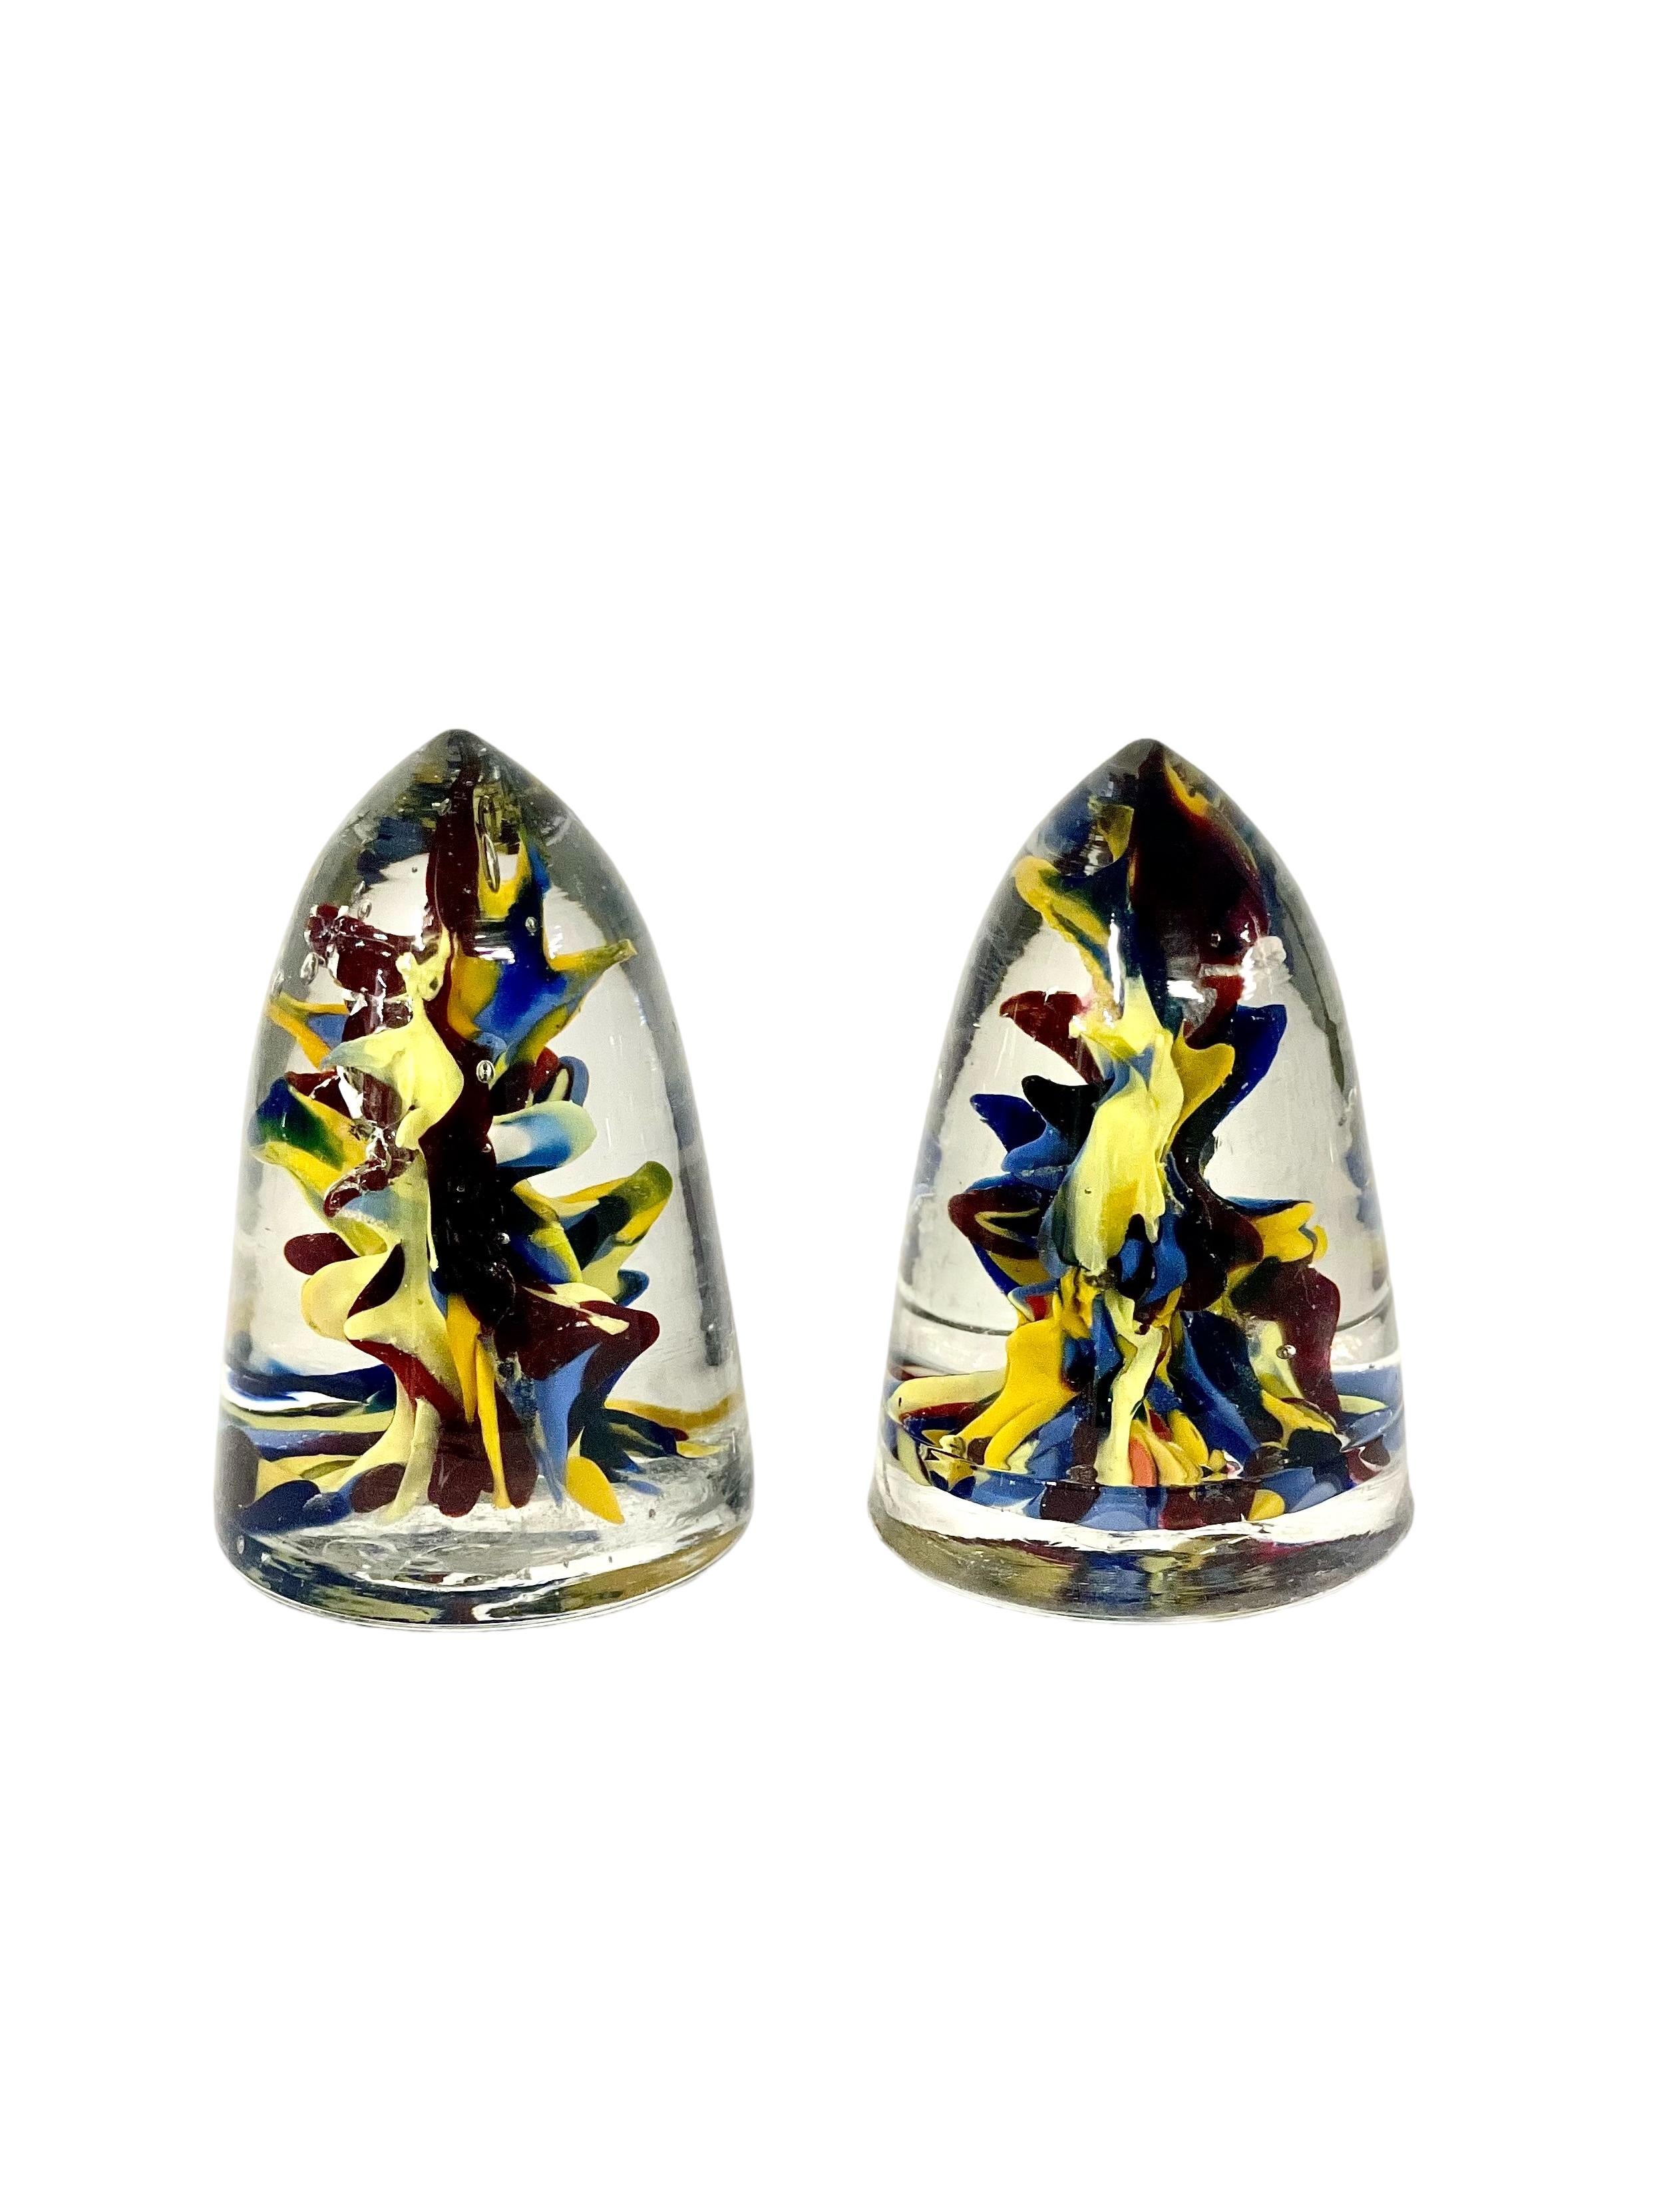 A very unusual and eye-catching pair of 19th century crystal paperweights in the shape of conical 'shells'. Smooth to the touch, their clear crystal cones are filled with a riot of hand blown colours in vibrant shades of blue, yellow and red.